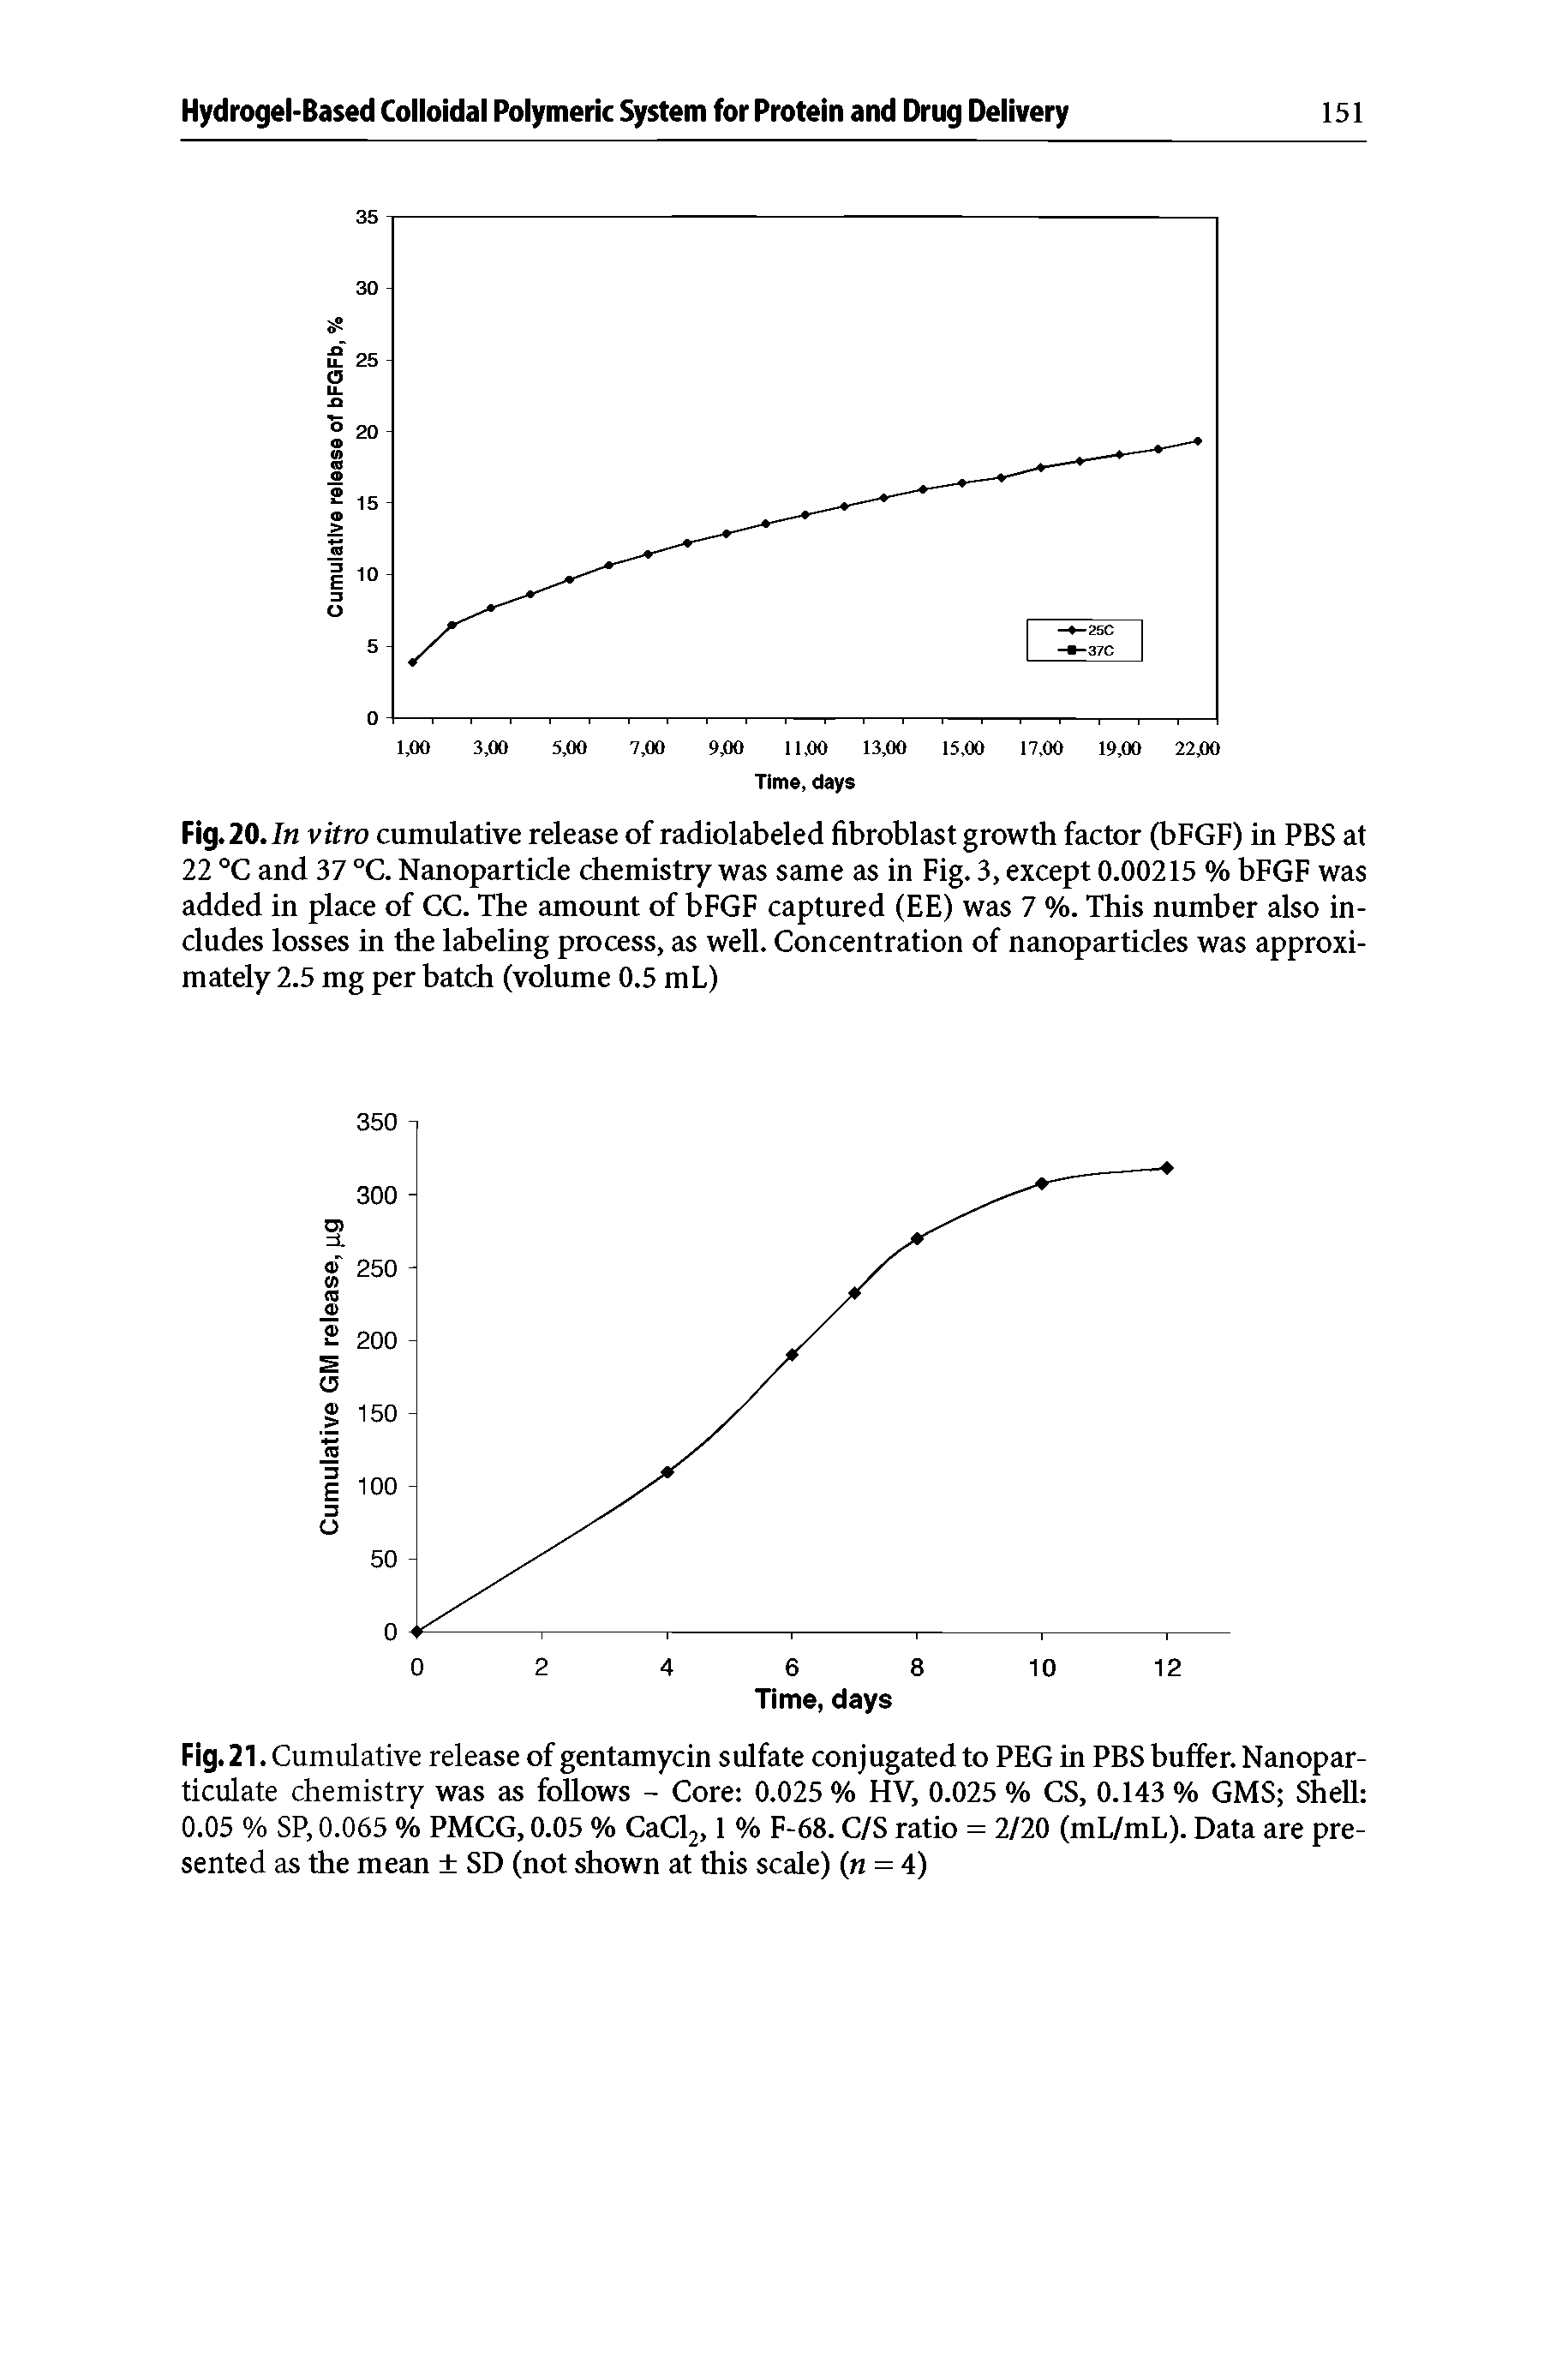 Fig. 20. In vitro cumulative release of radiolabeled fibroblast growth factor (bFGF) in PBS at 22 °C and 37 °C. Nanoparticle chemistry was same as in Fig. 3, except 0.00215 % bFGF was added in place of CC. The amount of bFGF captured (EE) was 7 %. This number also includes losses in the labeling process, as well. Concentration of nanoparticles was approximately 2.5 mg per batch (volume 0.5 mL)...